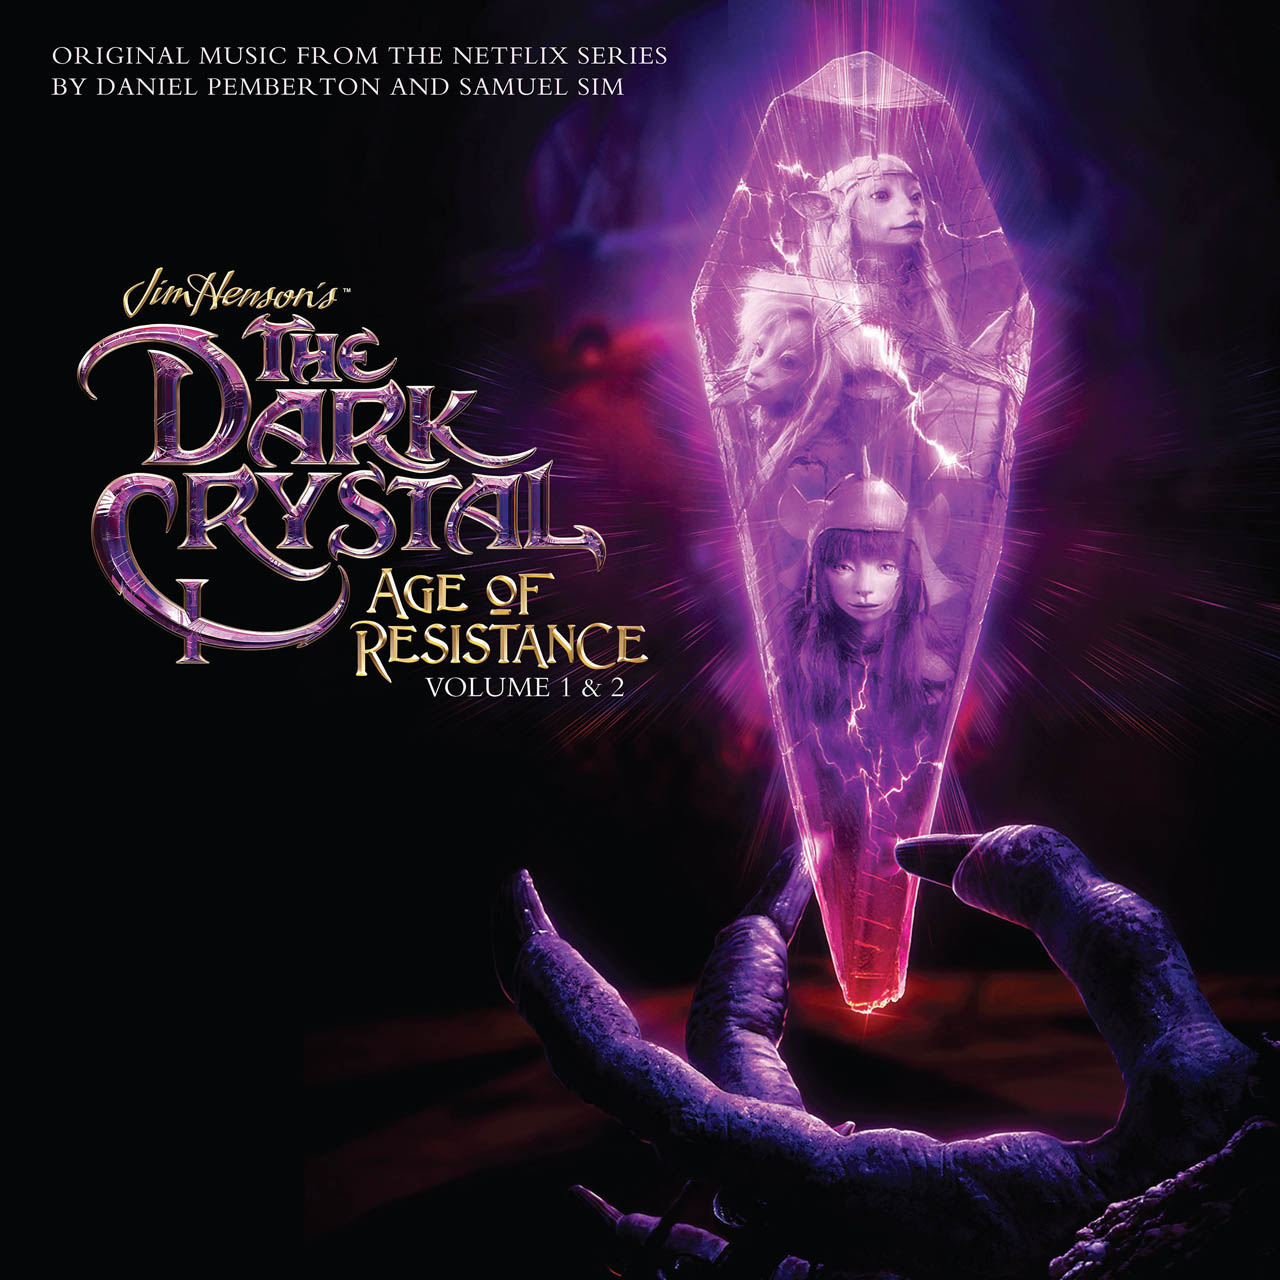 The Dark Crystal - Age of Resistance